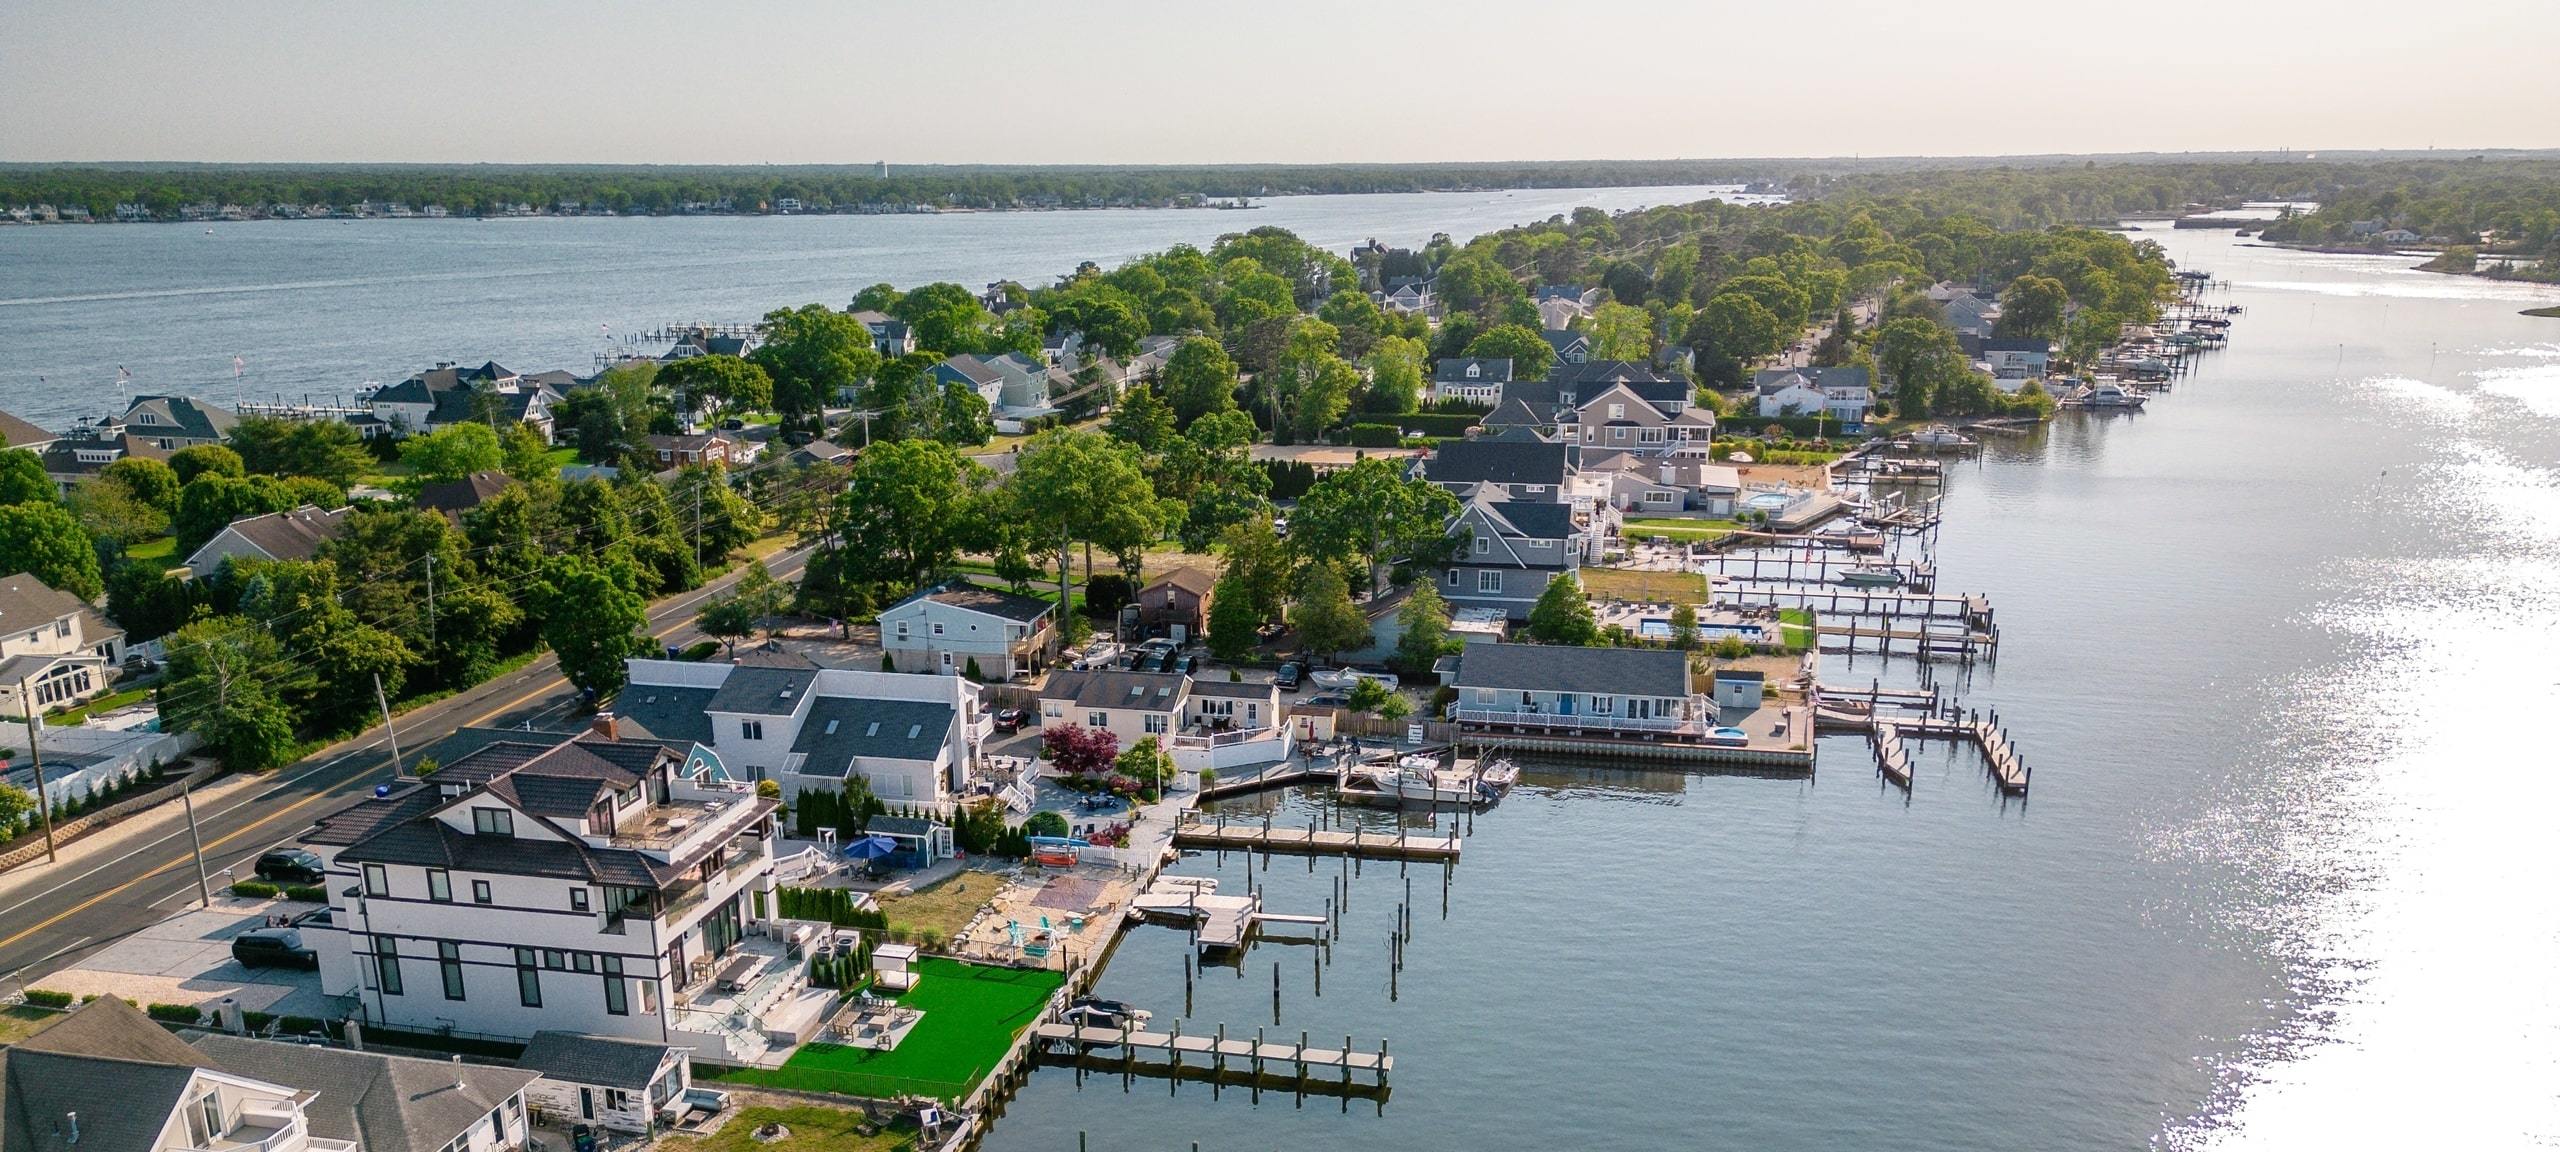 Aerial view of luxury waterfront homes in Brick, Jersey Shore